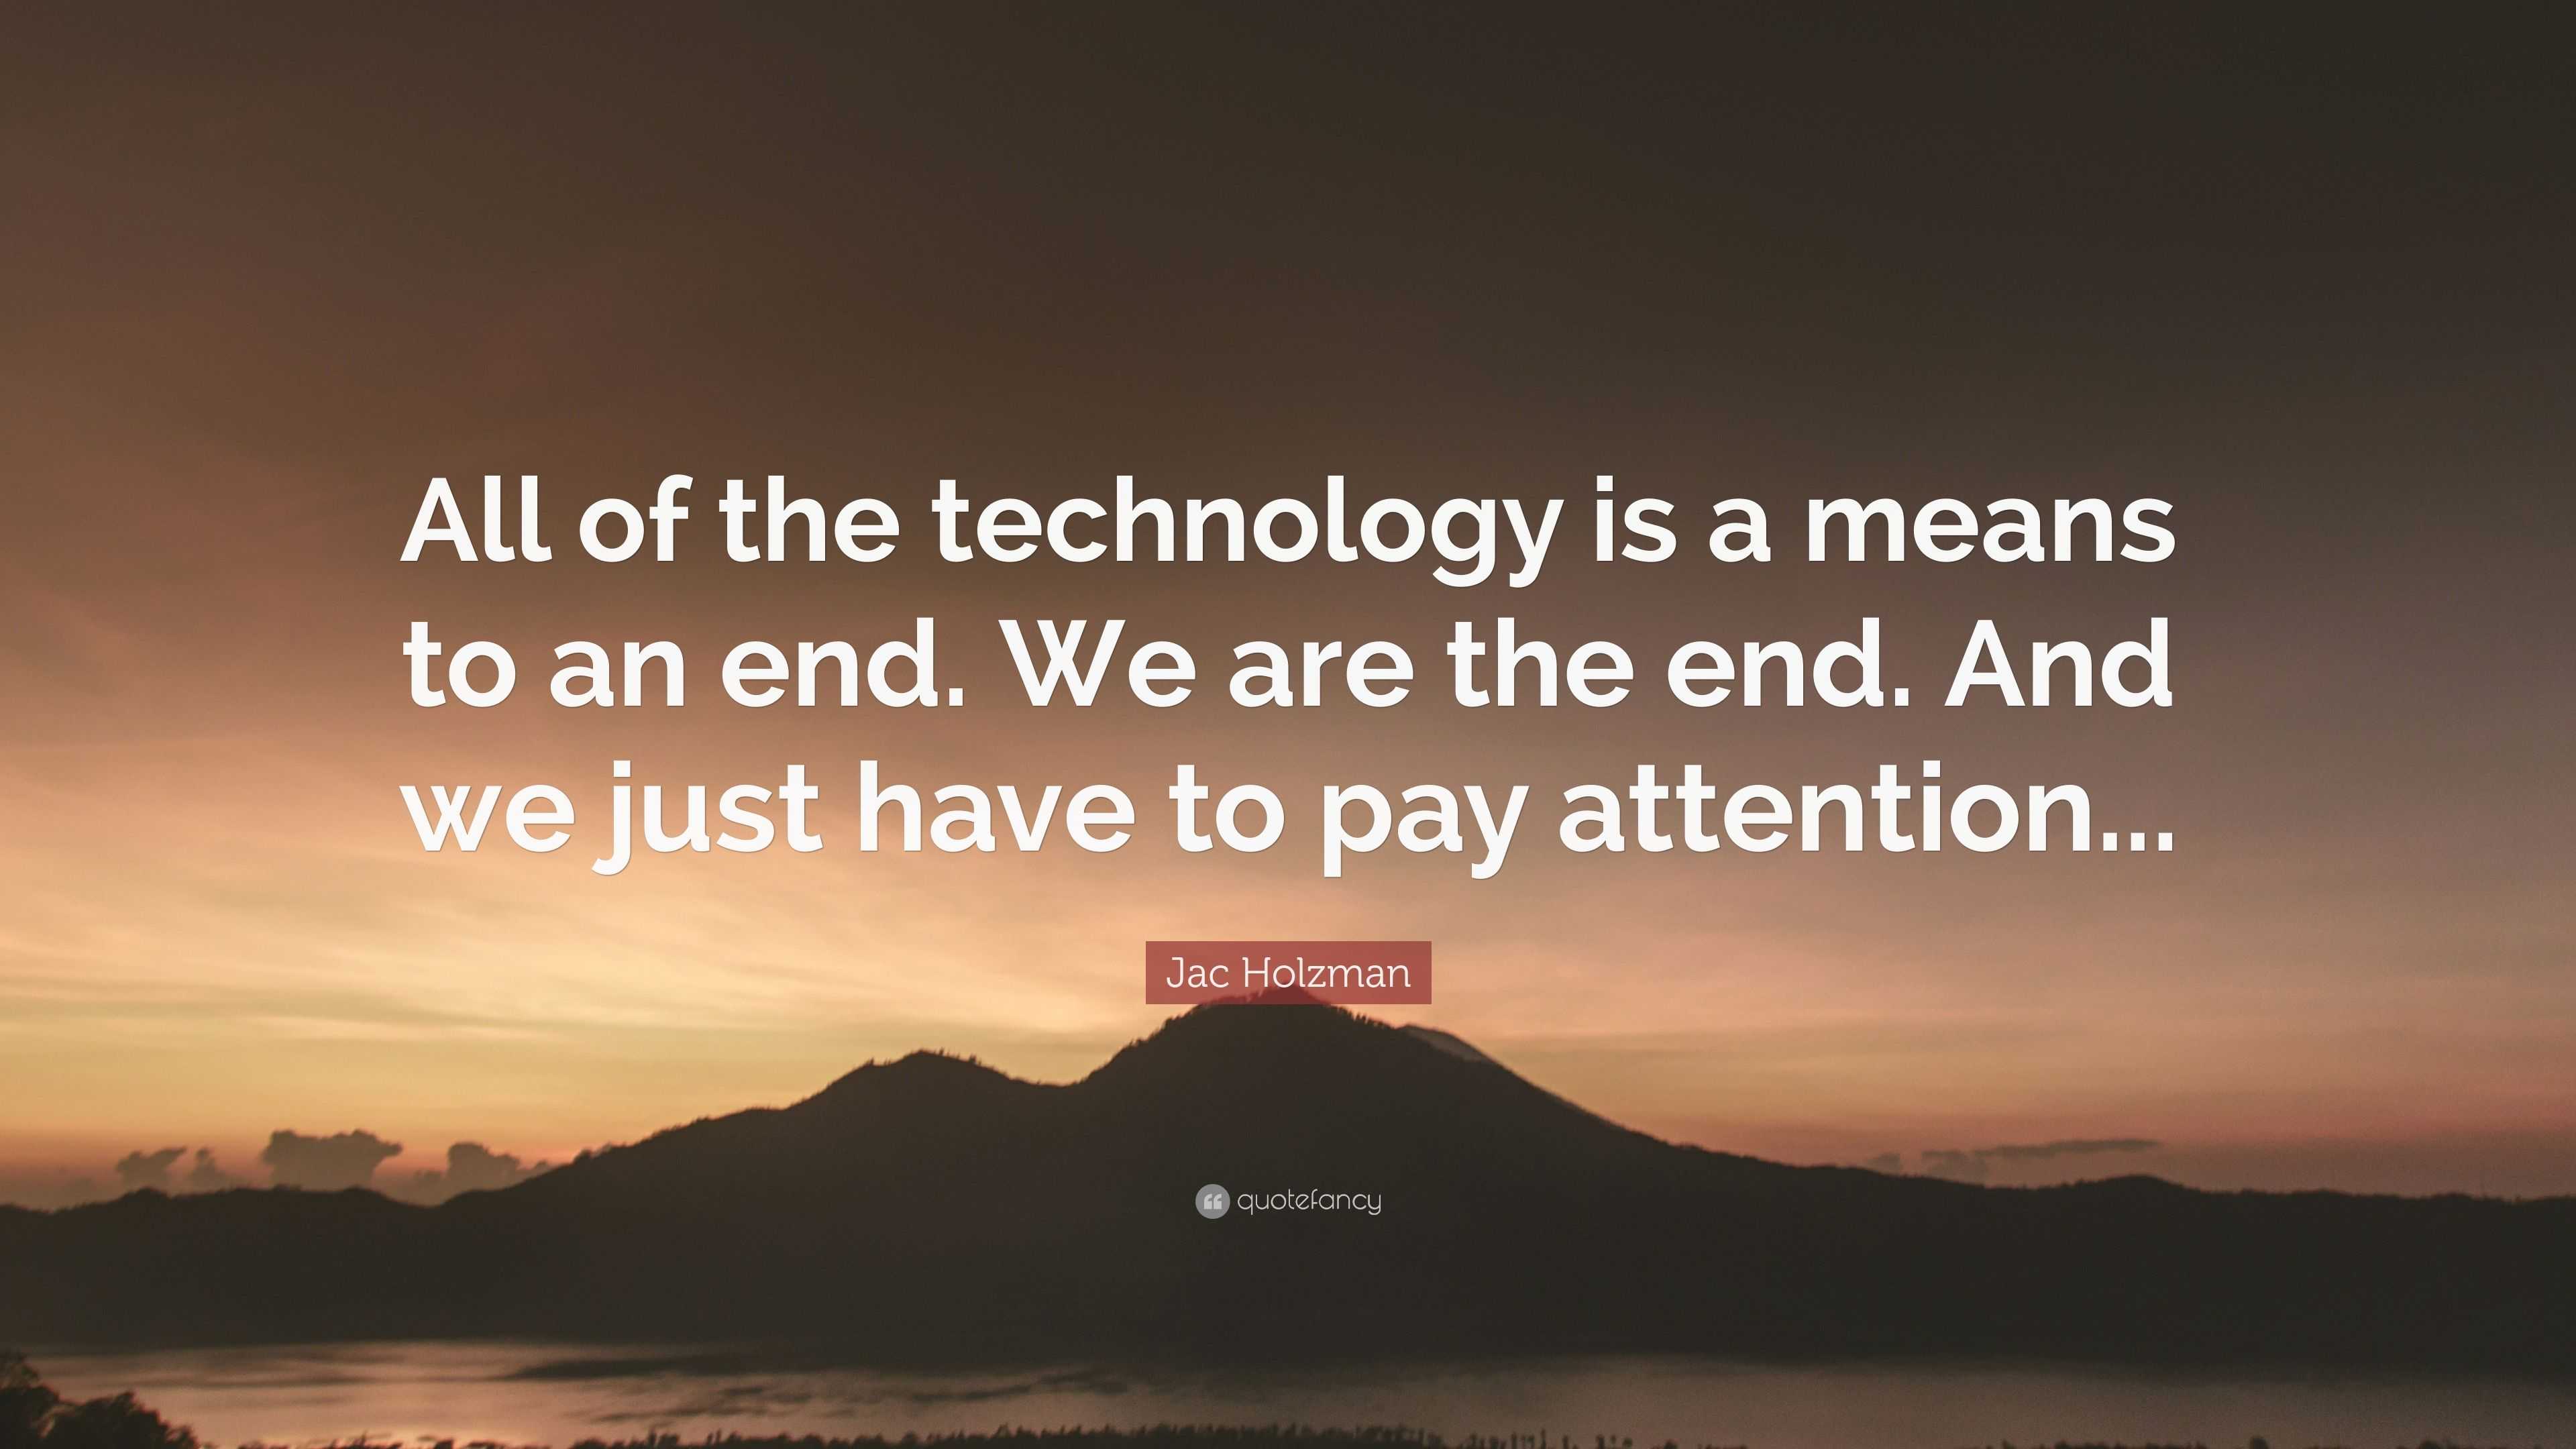 Jac Holzman Quote: “All of the technology is a means to an end. We are ...